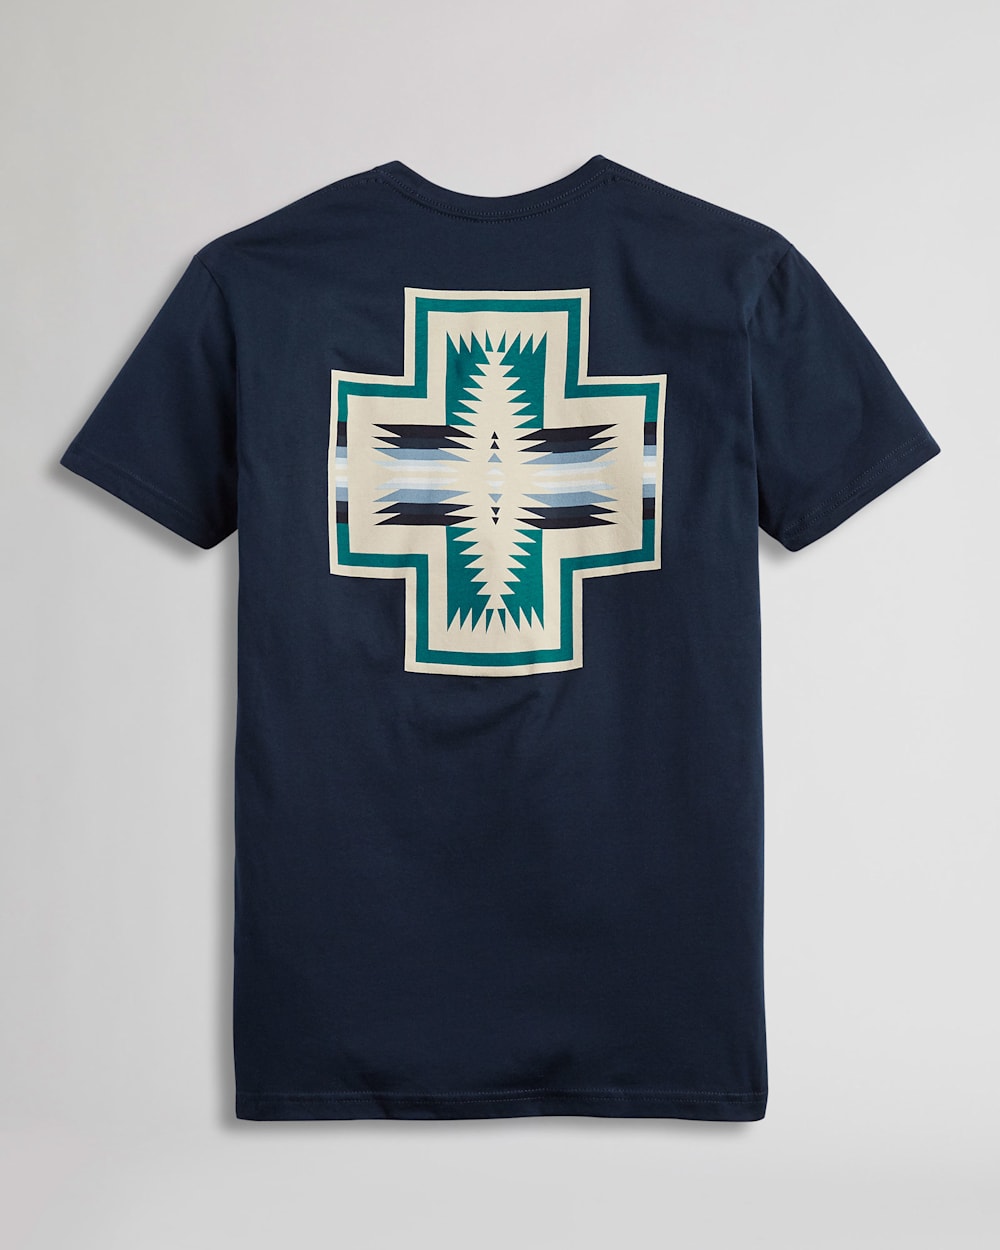 ALTERNATE VIEW OF MEN'S HARDING GRAPHIC TEE IN MIDNIGHT NAVY image number 2